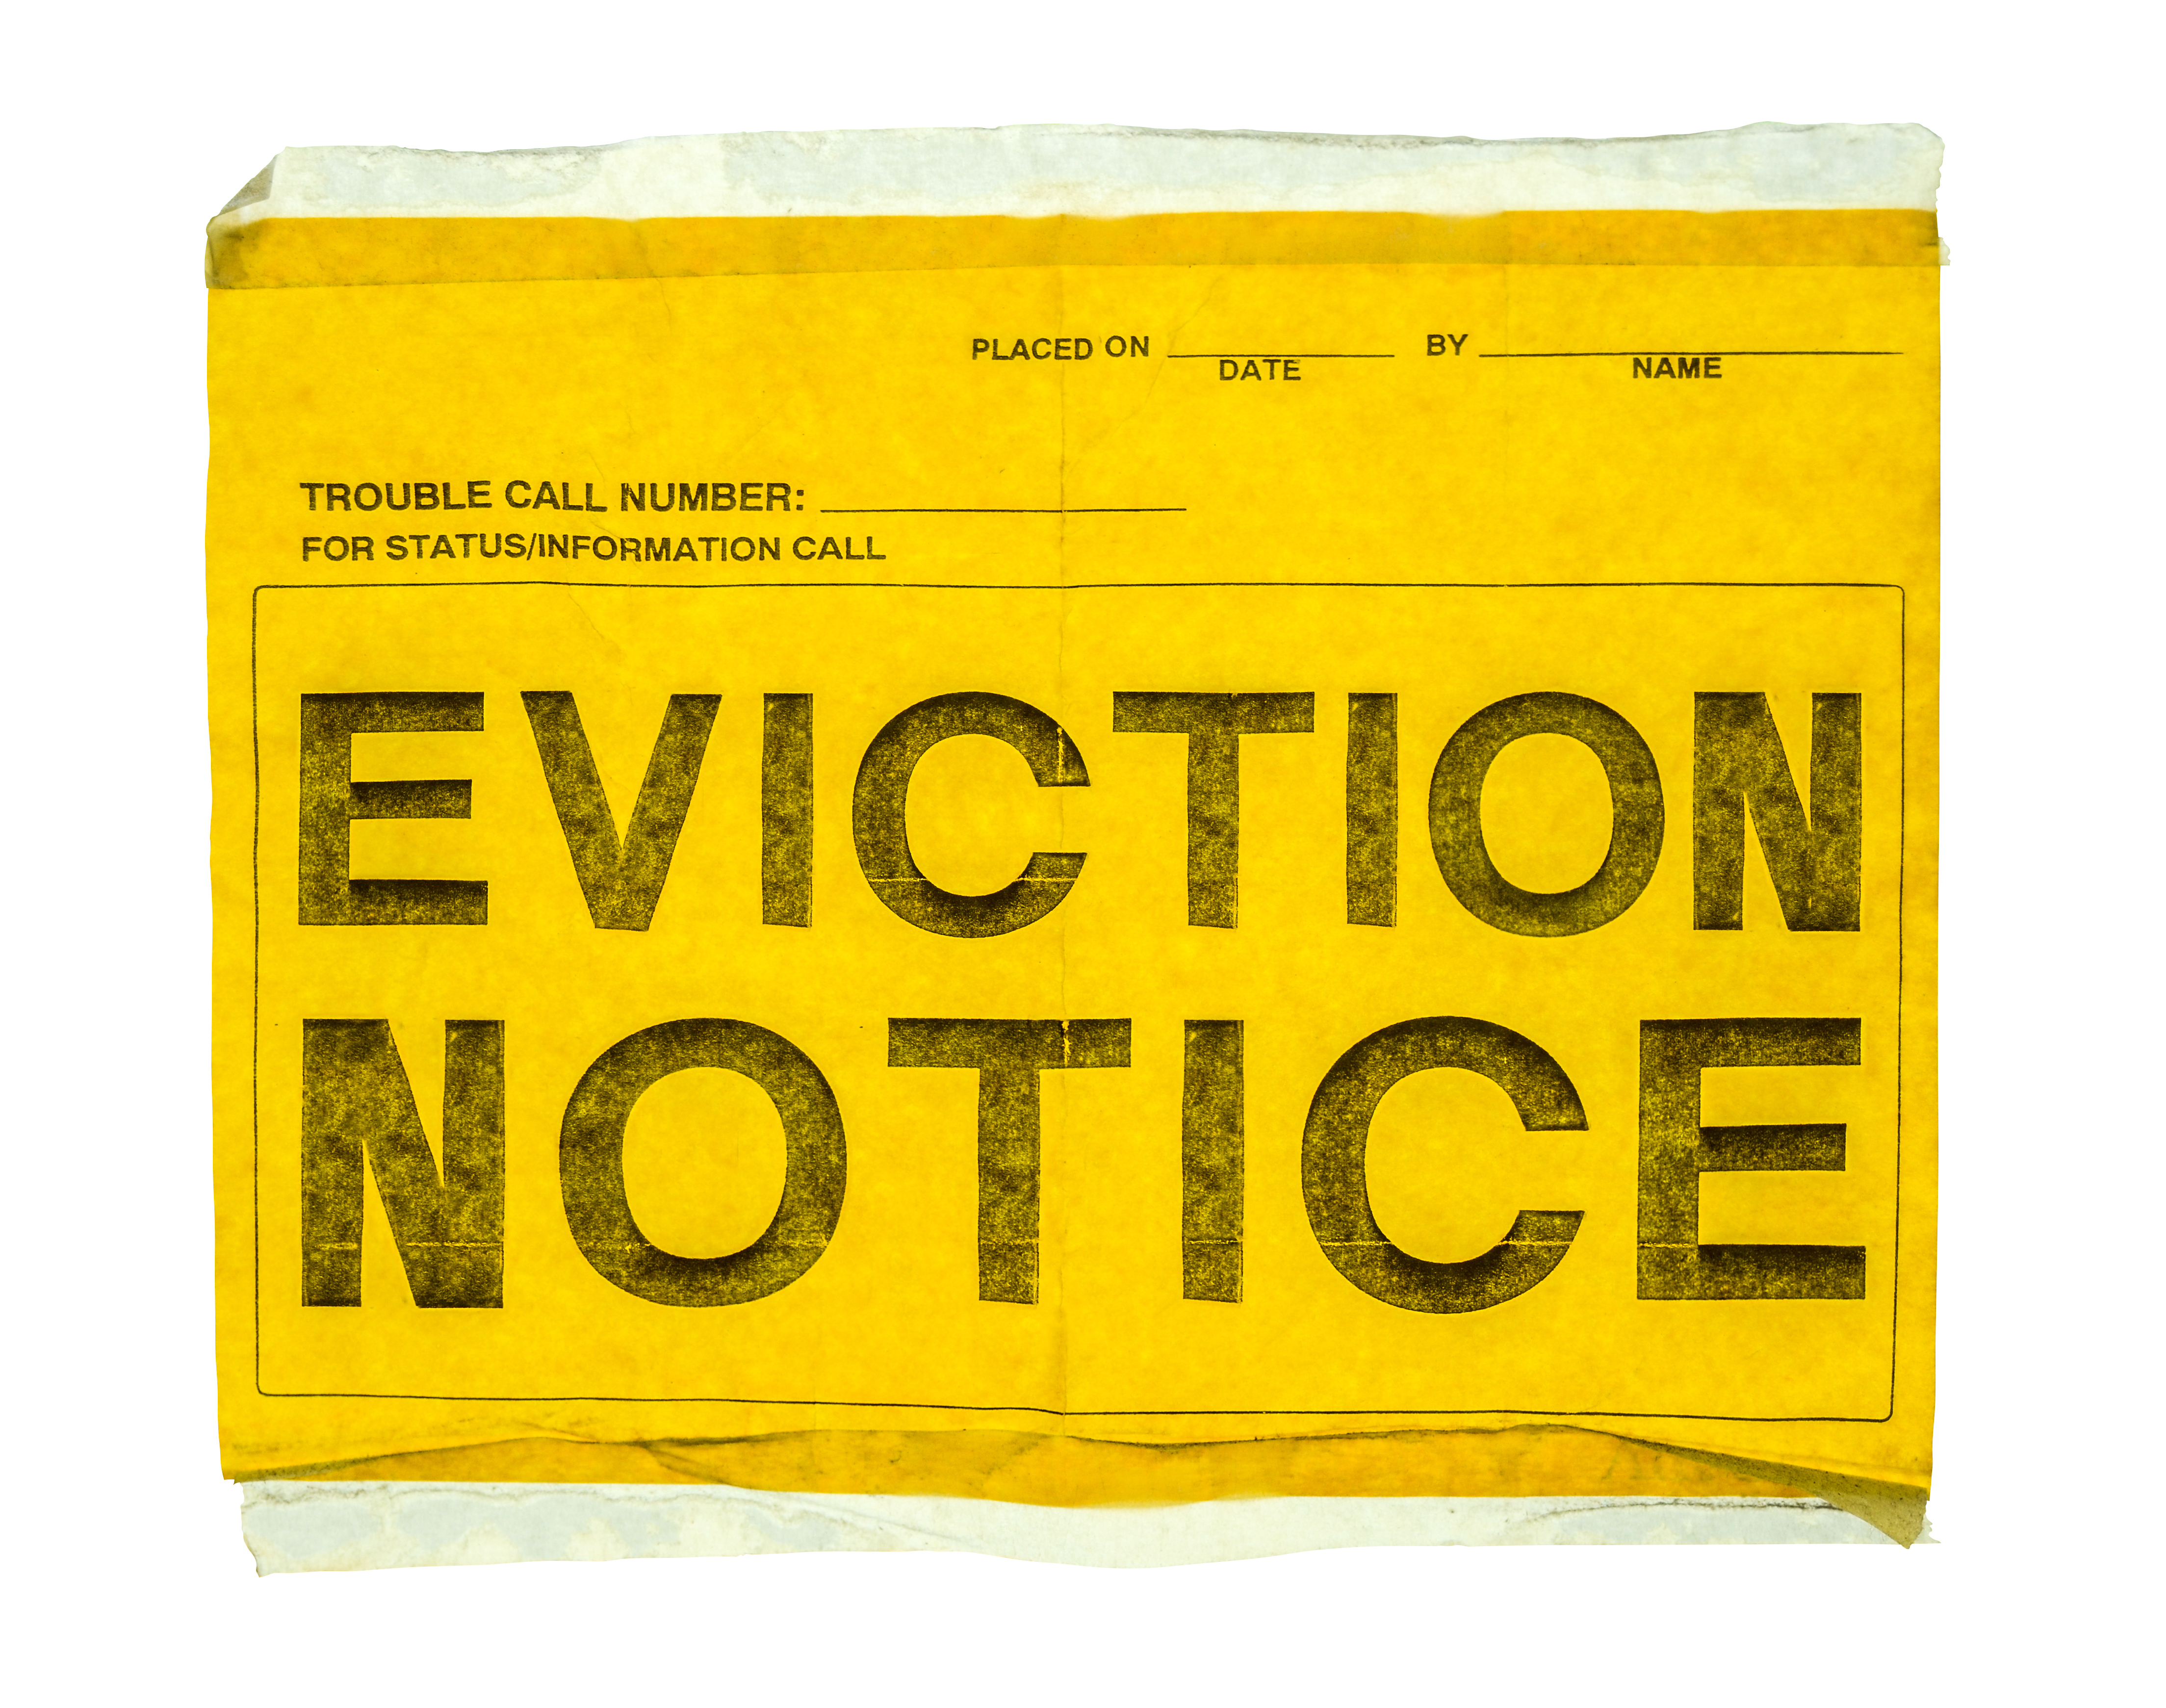 Seeking out professional help and resources is a key recommendation for anyone facing eviction.